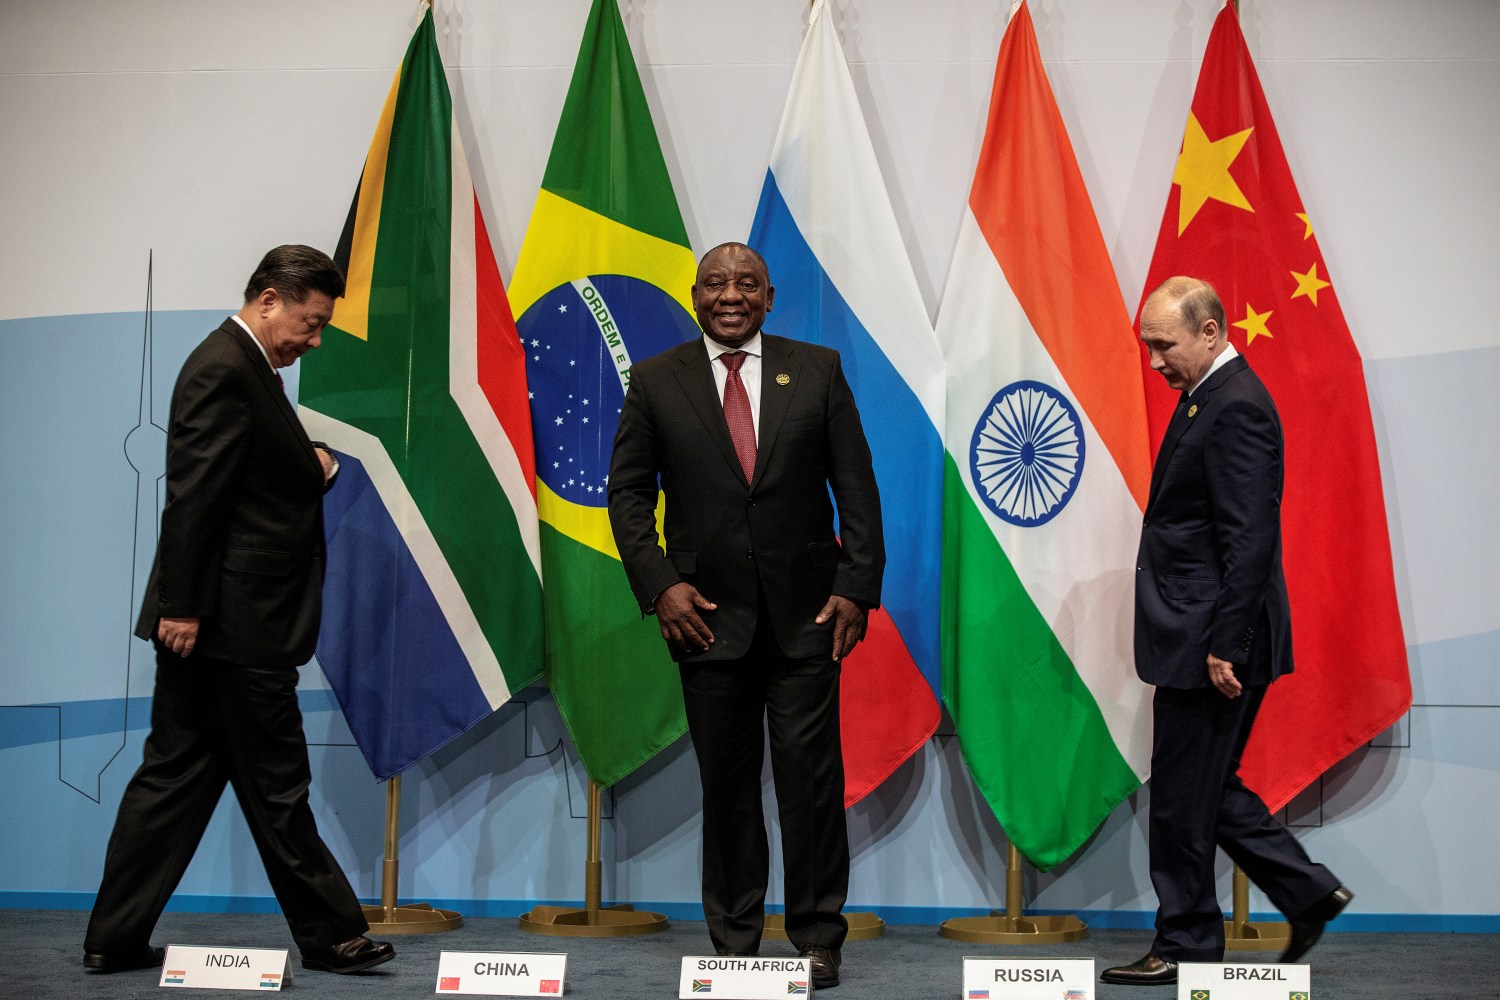 South Africa's President Cyril Ramaphosa, China's President Xi Jinping and Russia's President Vladimir Putin arrive prior to posing for a group picture at the BRICS summit meeting in Johannesburg, South Africa, July 26, 2018. Gianluigi Guercia/Pool via REUTERS? - RC14540D3CE0